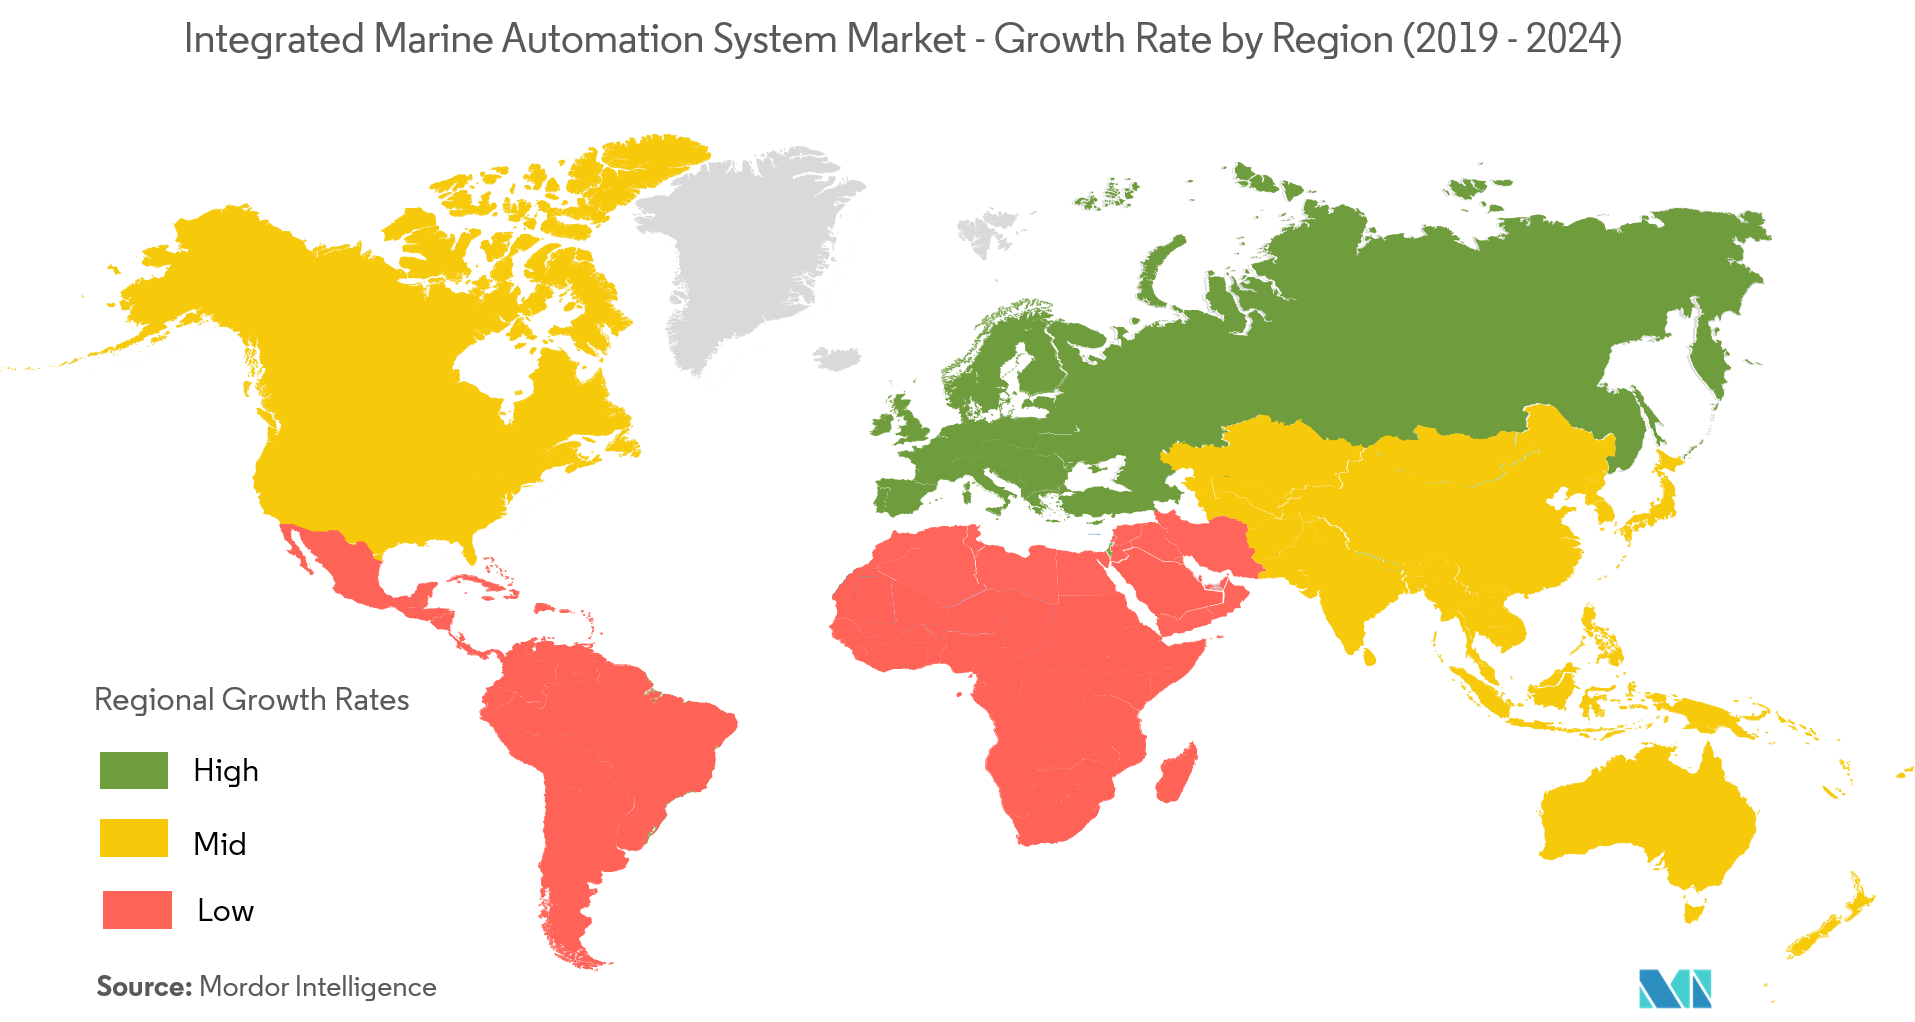 Integrated Marine Automation Systems - Growth Rate by Region (2019 - 2024)